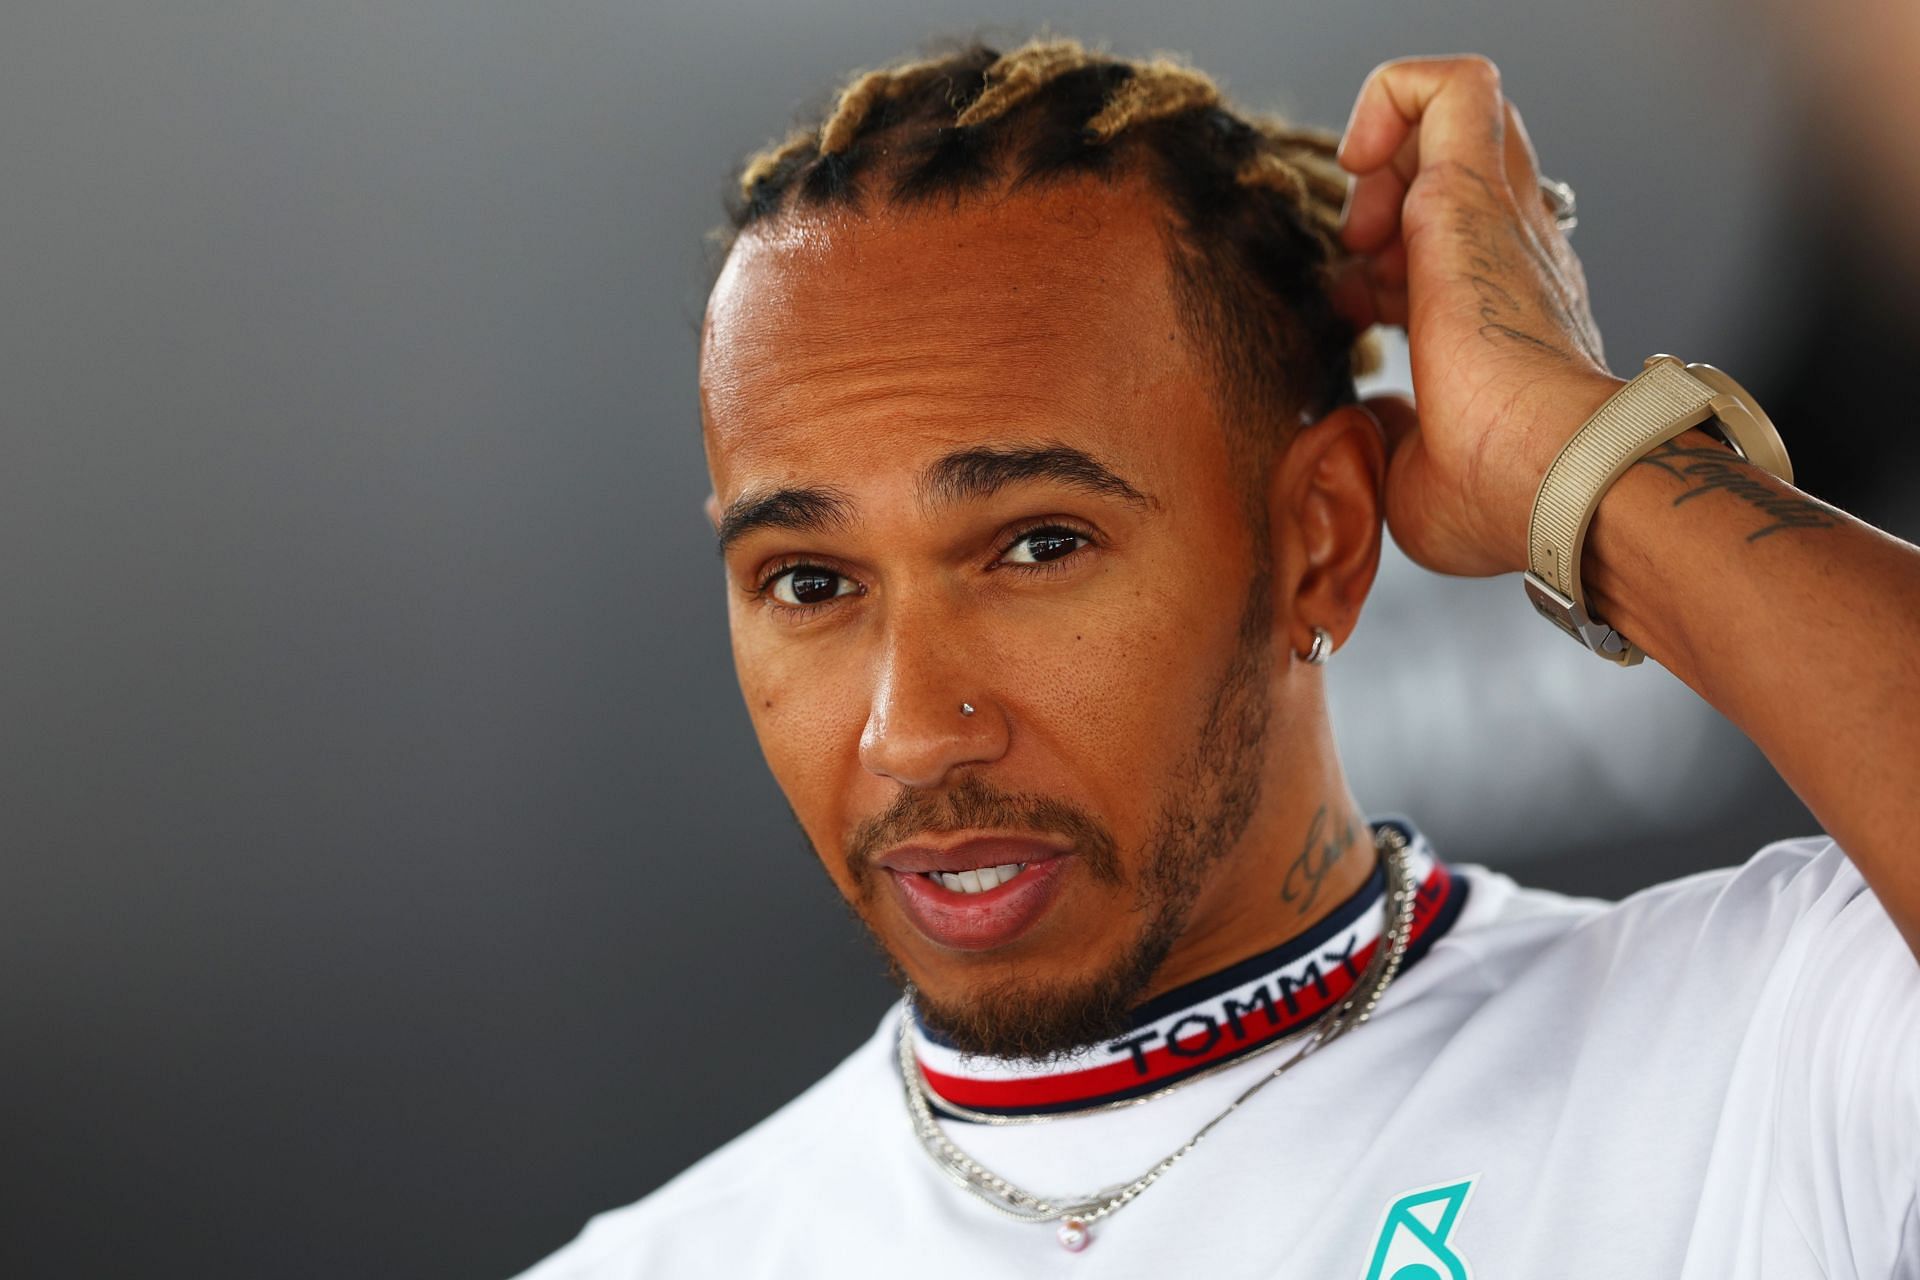 Lewis Hamilton speaks to the media ahead of the 2022 F1 Canadian GP. (Photo by Clive Rose/Getty Images)